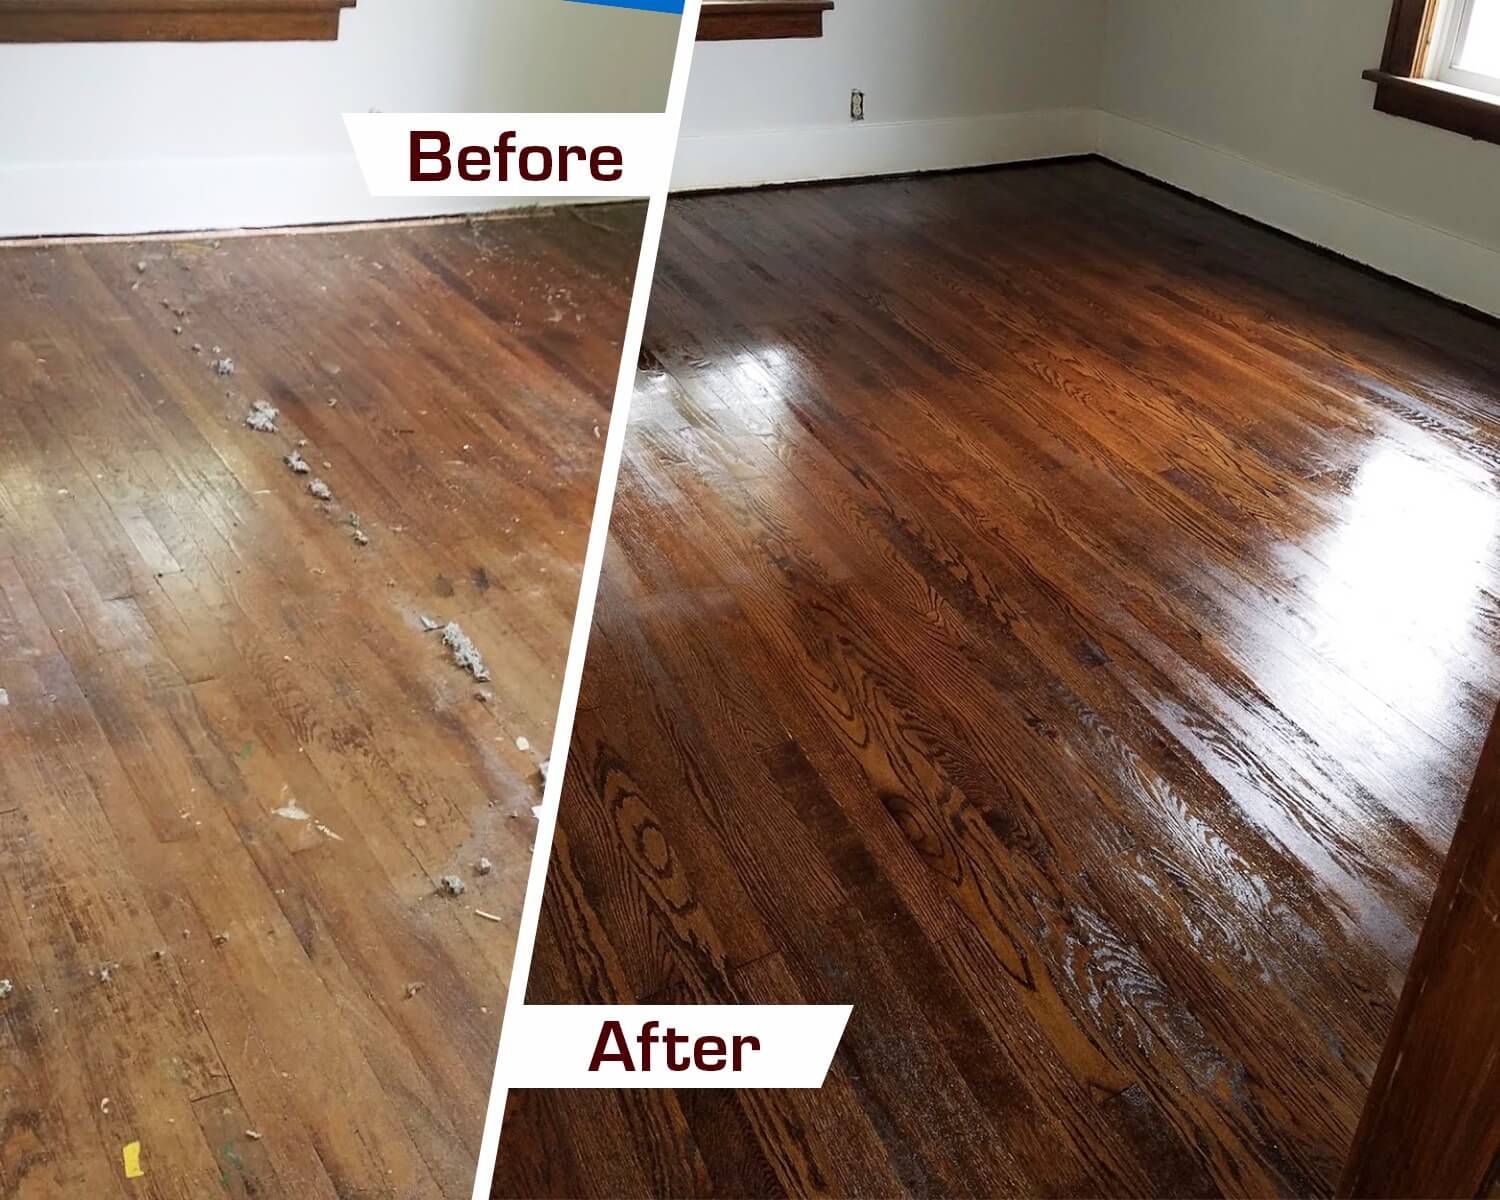 A before and after shot of a hardwood floor that's been refinished by Fabulous Floors Colorado Springs